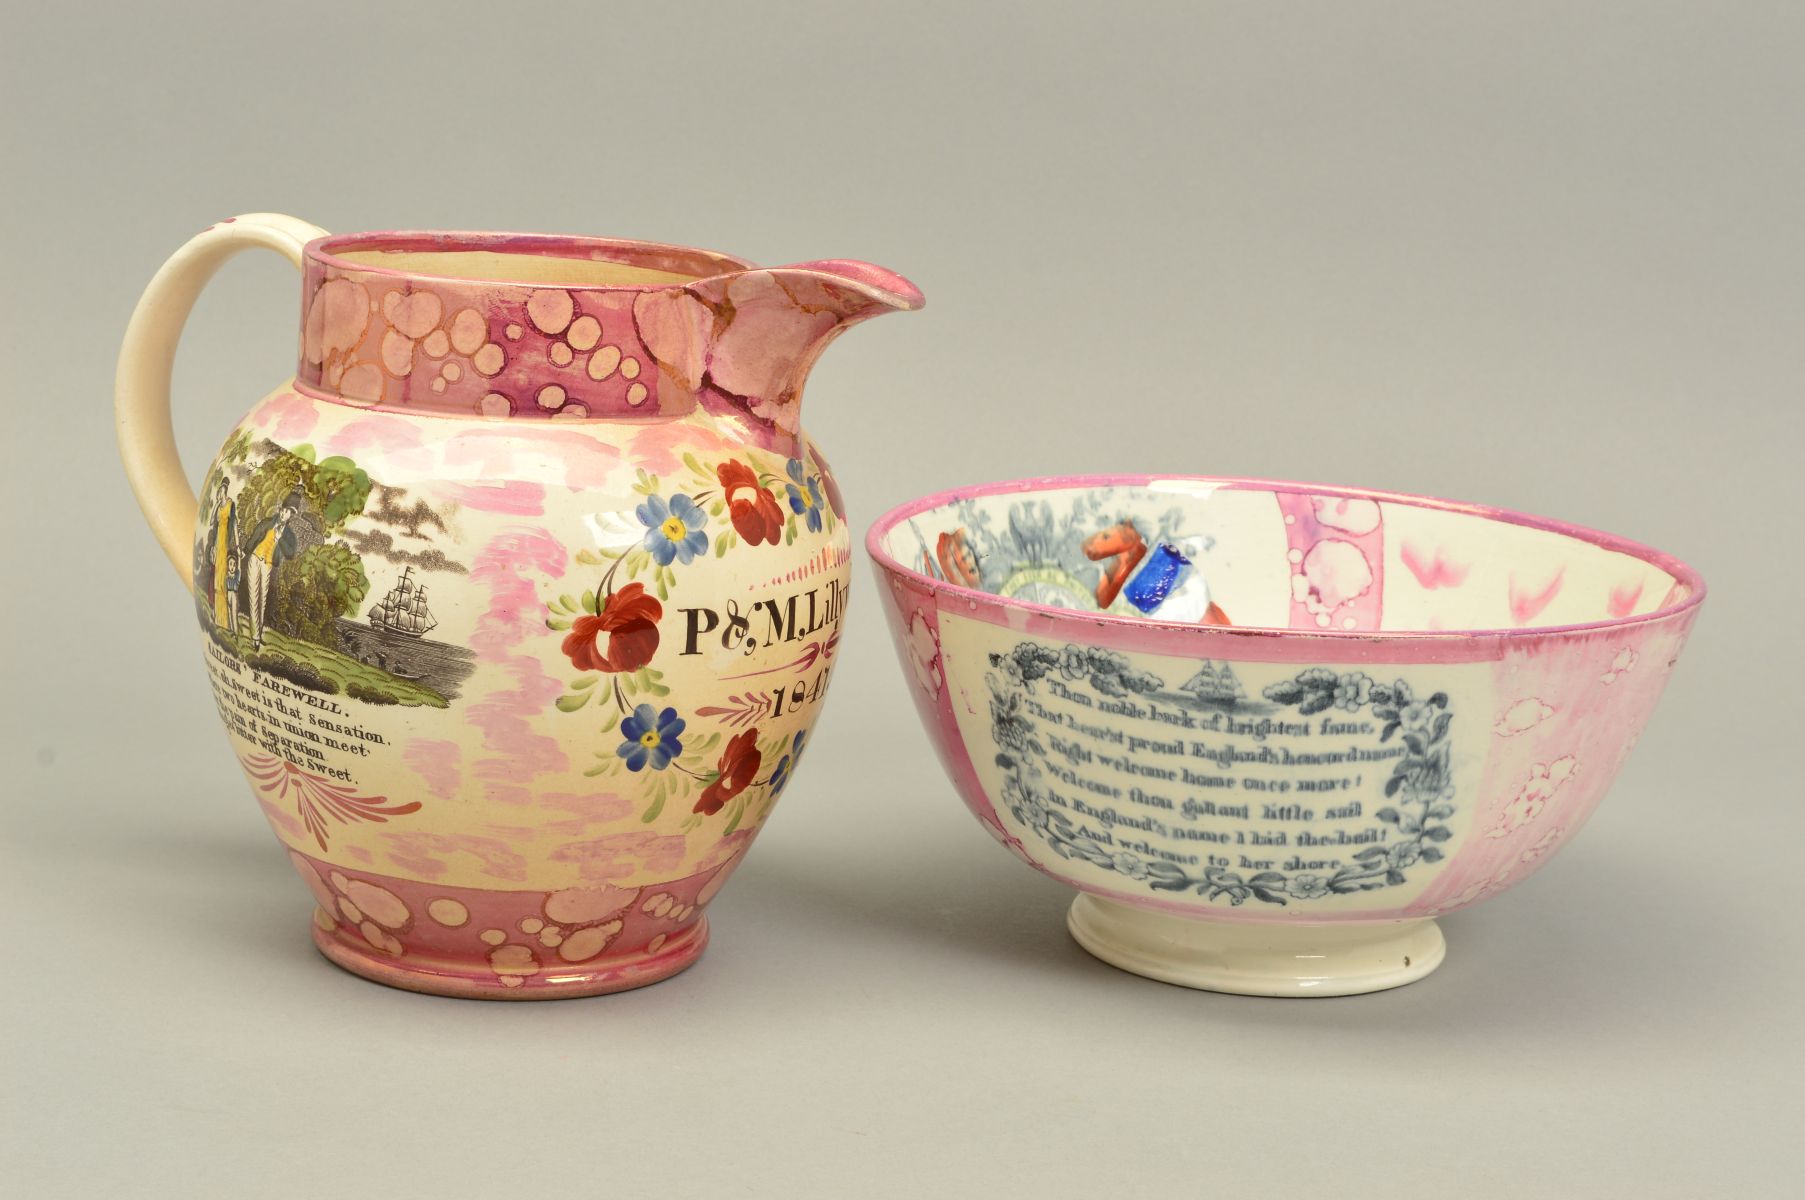 A EARLY VICTORIAN SUNDERLAND PINK LUSTRE JUG, printed and painted with a vignette and verse '